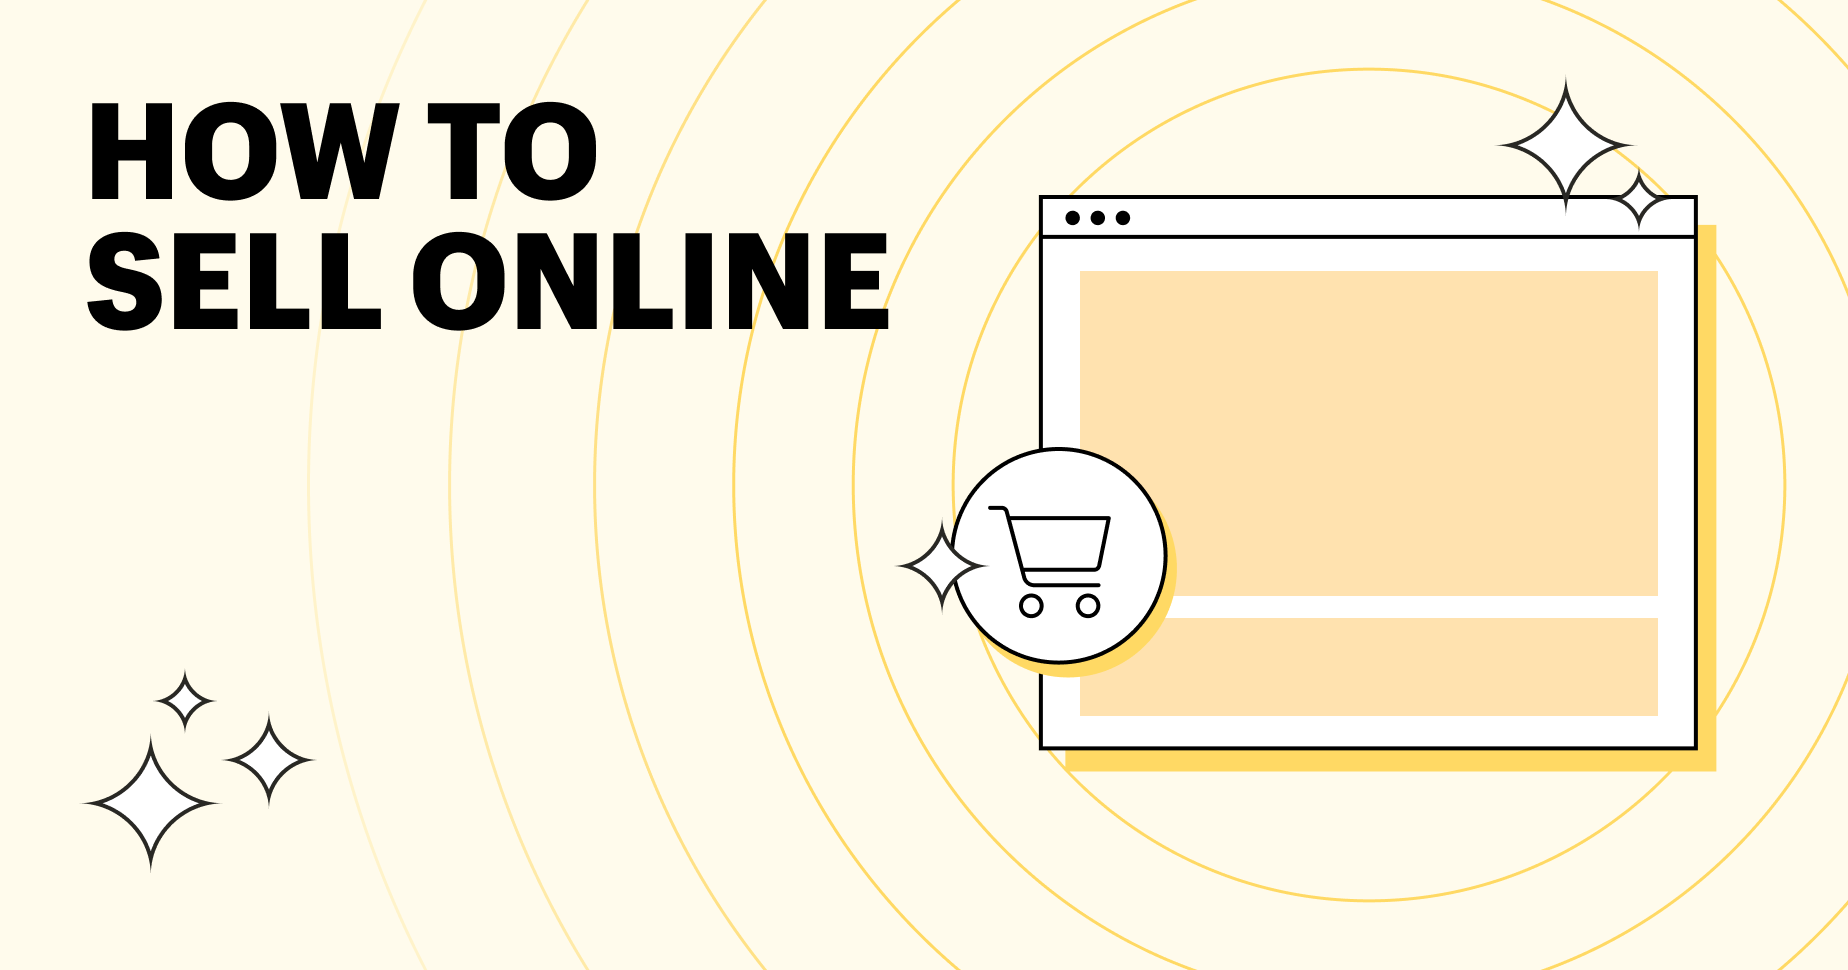 Graphic of a web page outline in a browser with a shopping cart icon. To the left reads the text "How to Sell Online"